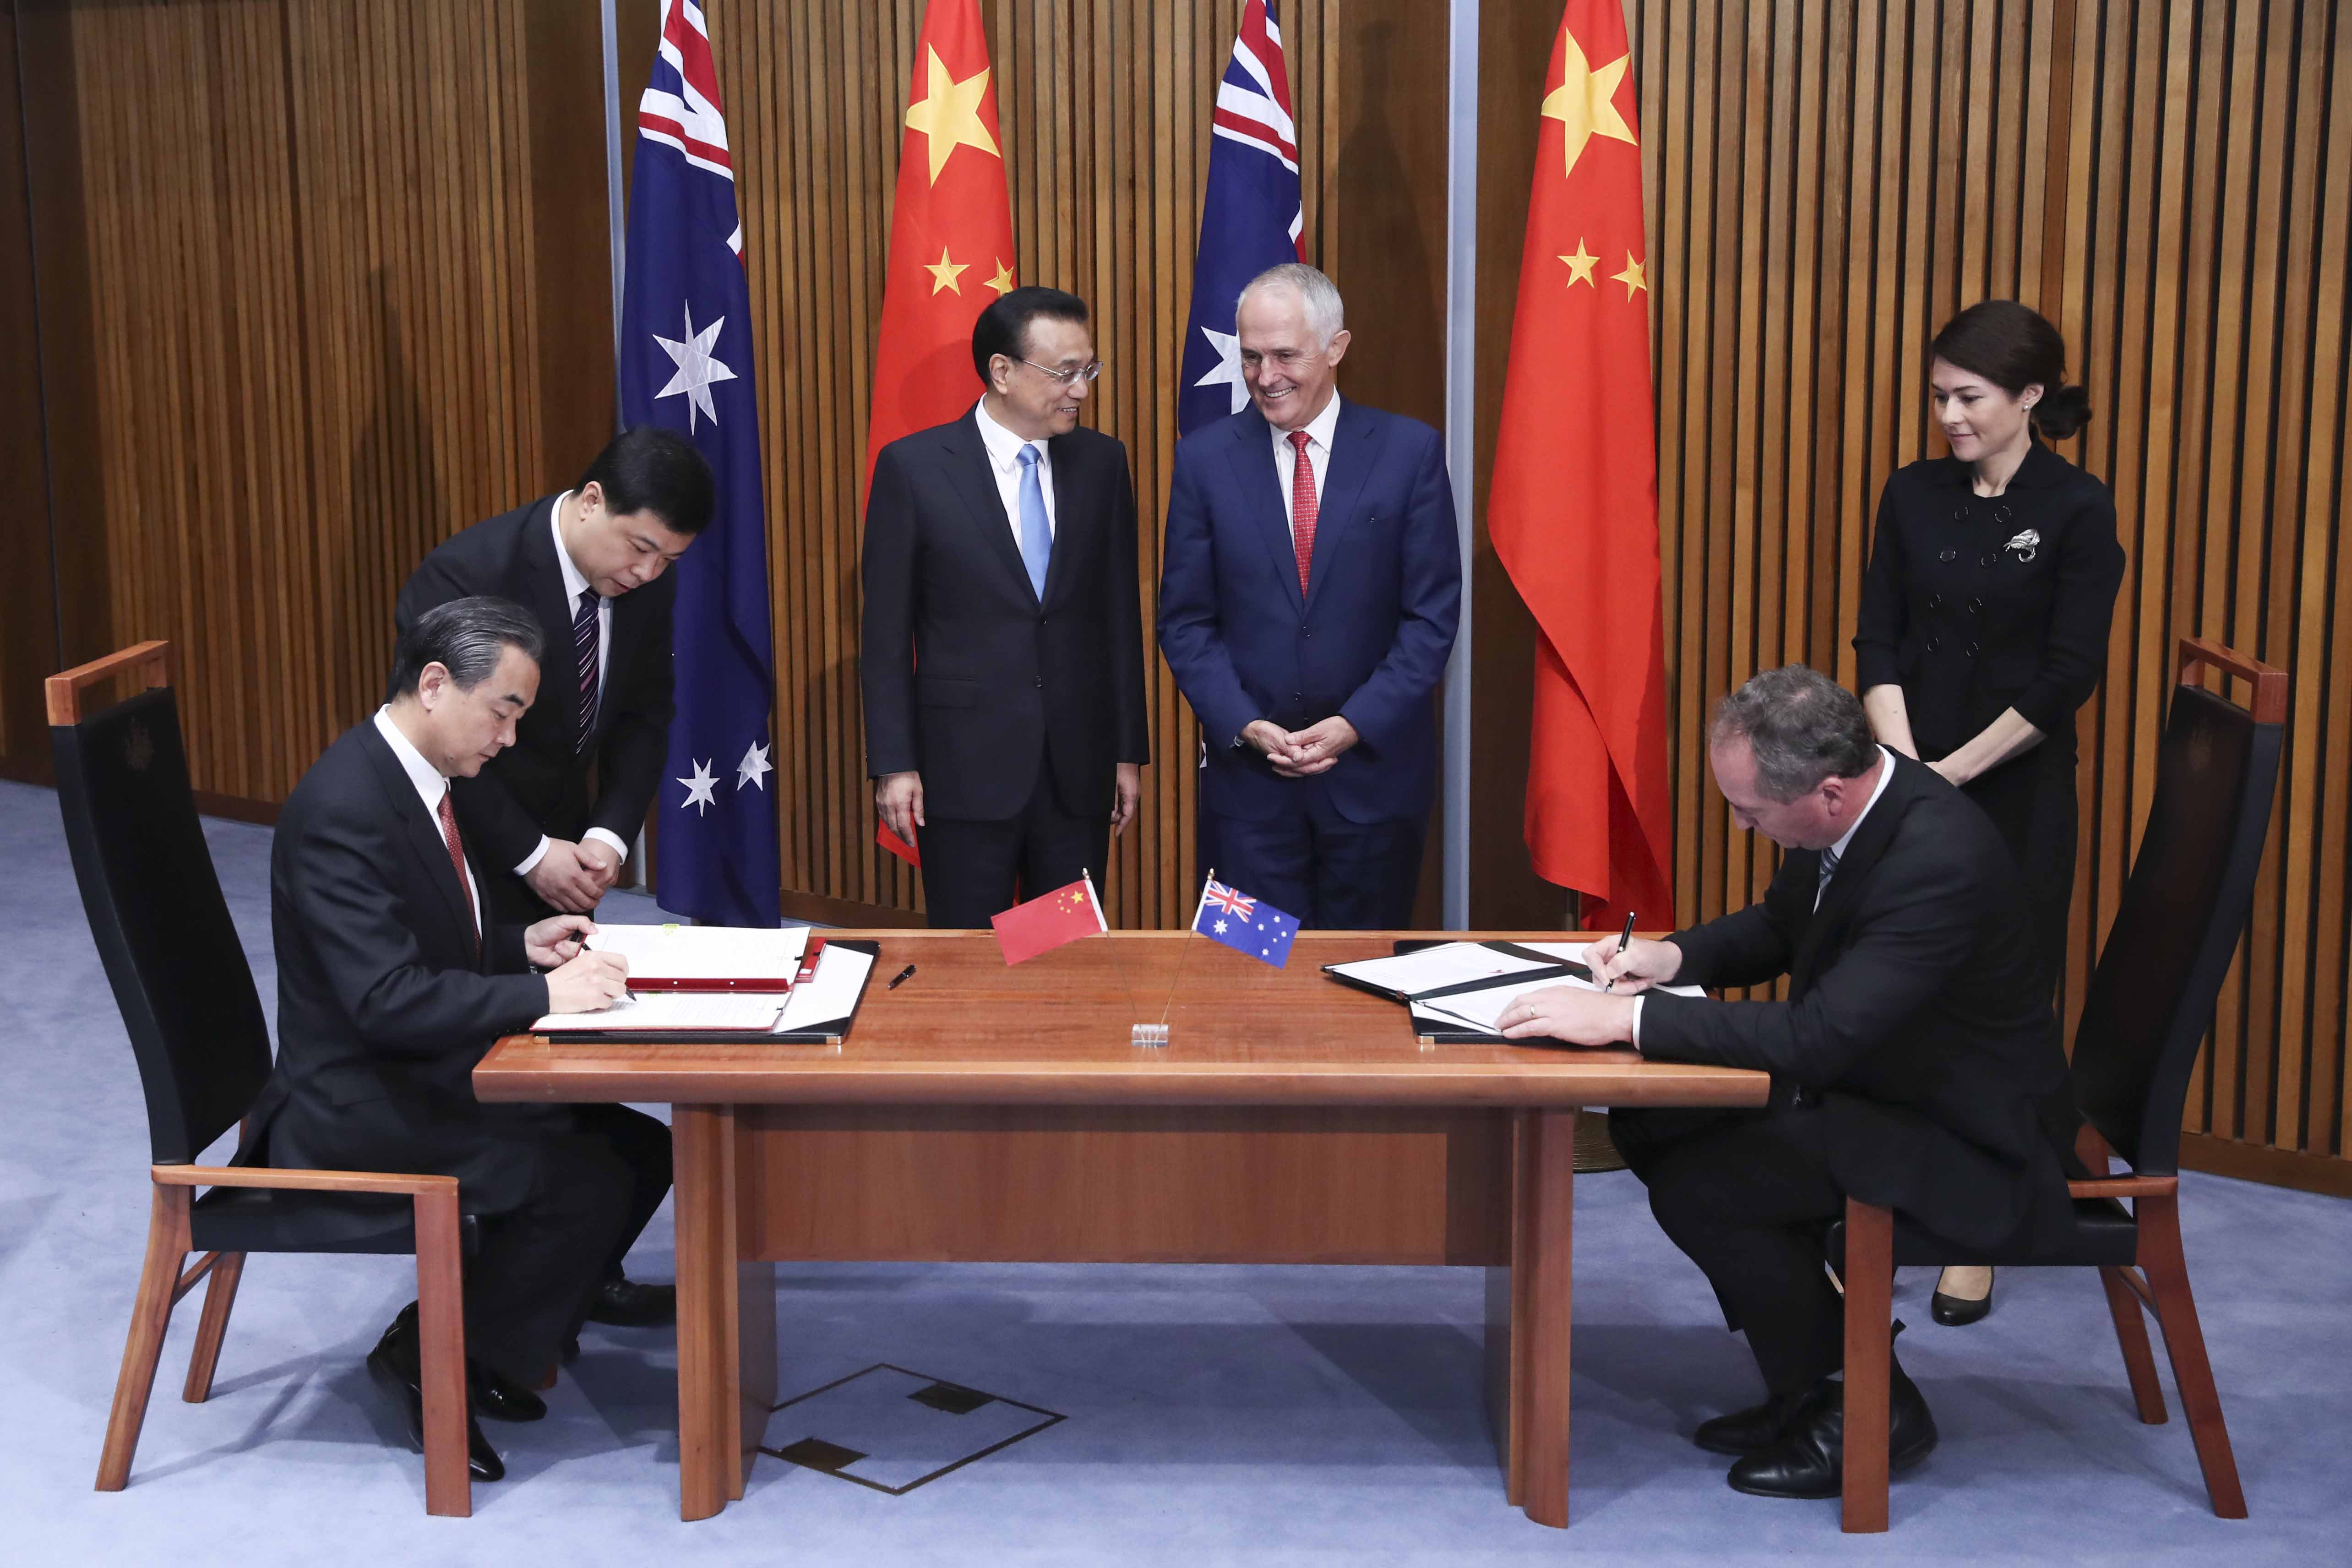 Visiting Chinese Premier Li Keqiang and Australian Prime Minister Malcolm Turnbull attend a signing ceremony of a series of cooperation agreements, after their annual meeting in Canberra, Australia on Friday, March 24, 2017. China and Australia signed eight cooperation agreements covering areas including trade and investment, inspection and quarantine, climate change, agriculture, culture, education and the China-Australia Free Trade Agreement. [Photo: gov.cn]